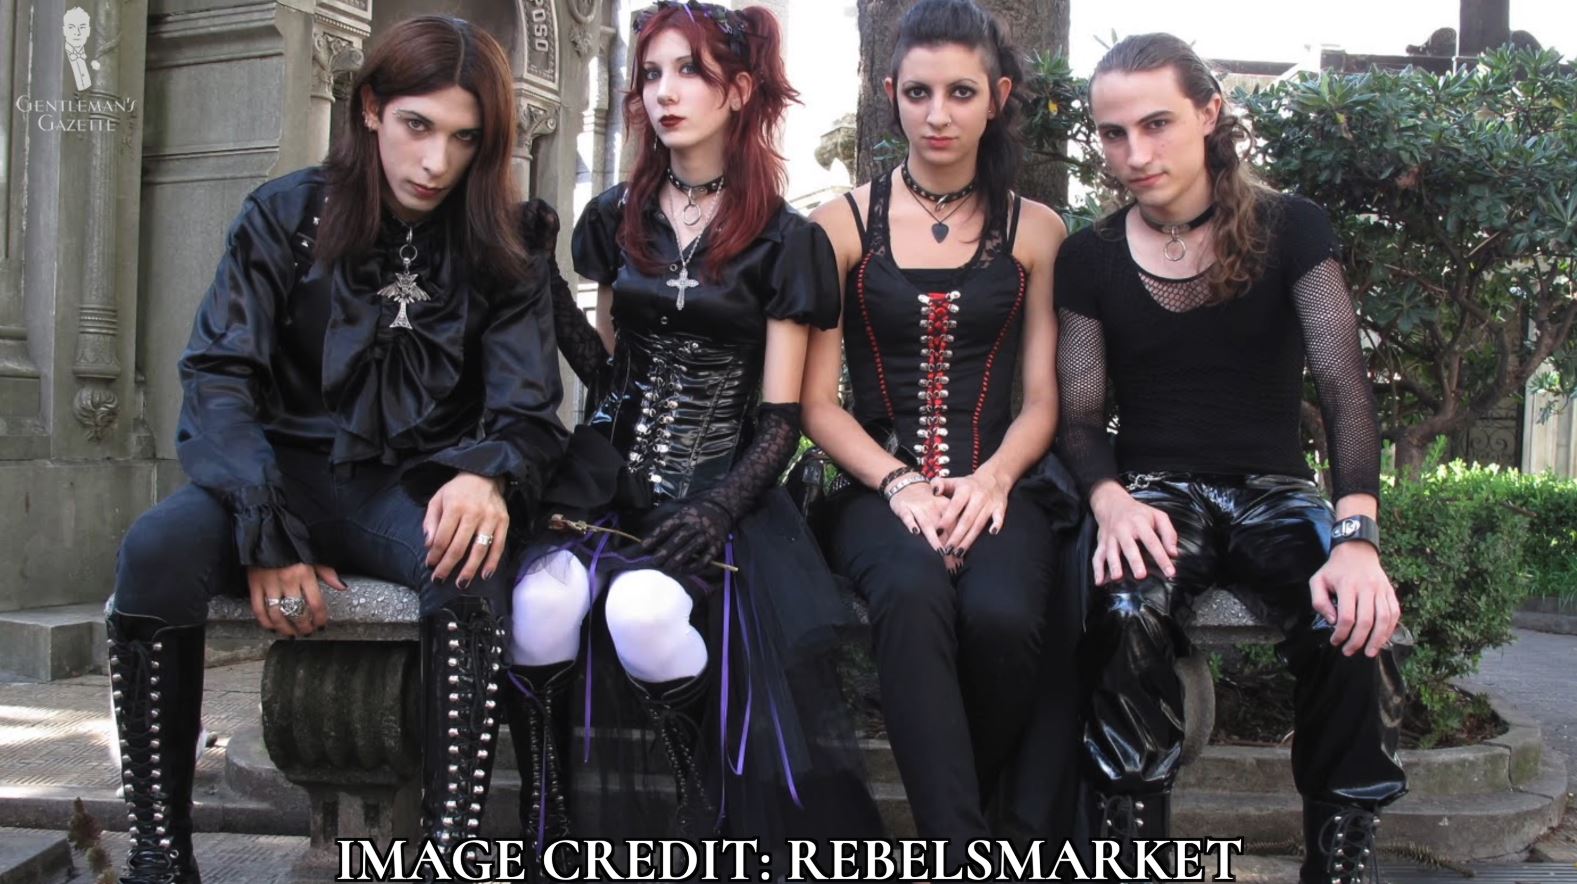 A group of teenage goths all in black clothing [Image Credit: Rebels Market]